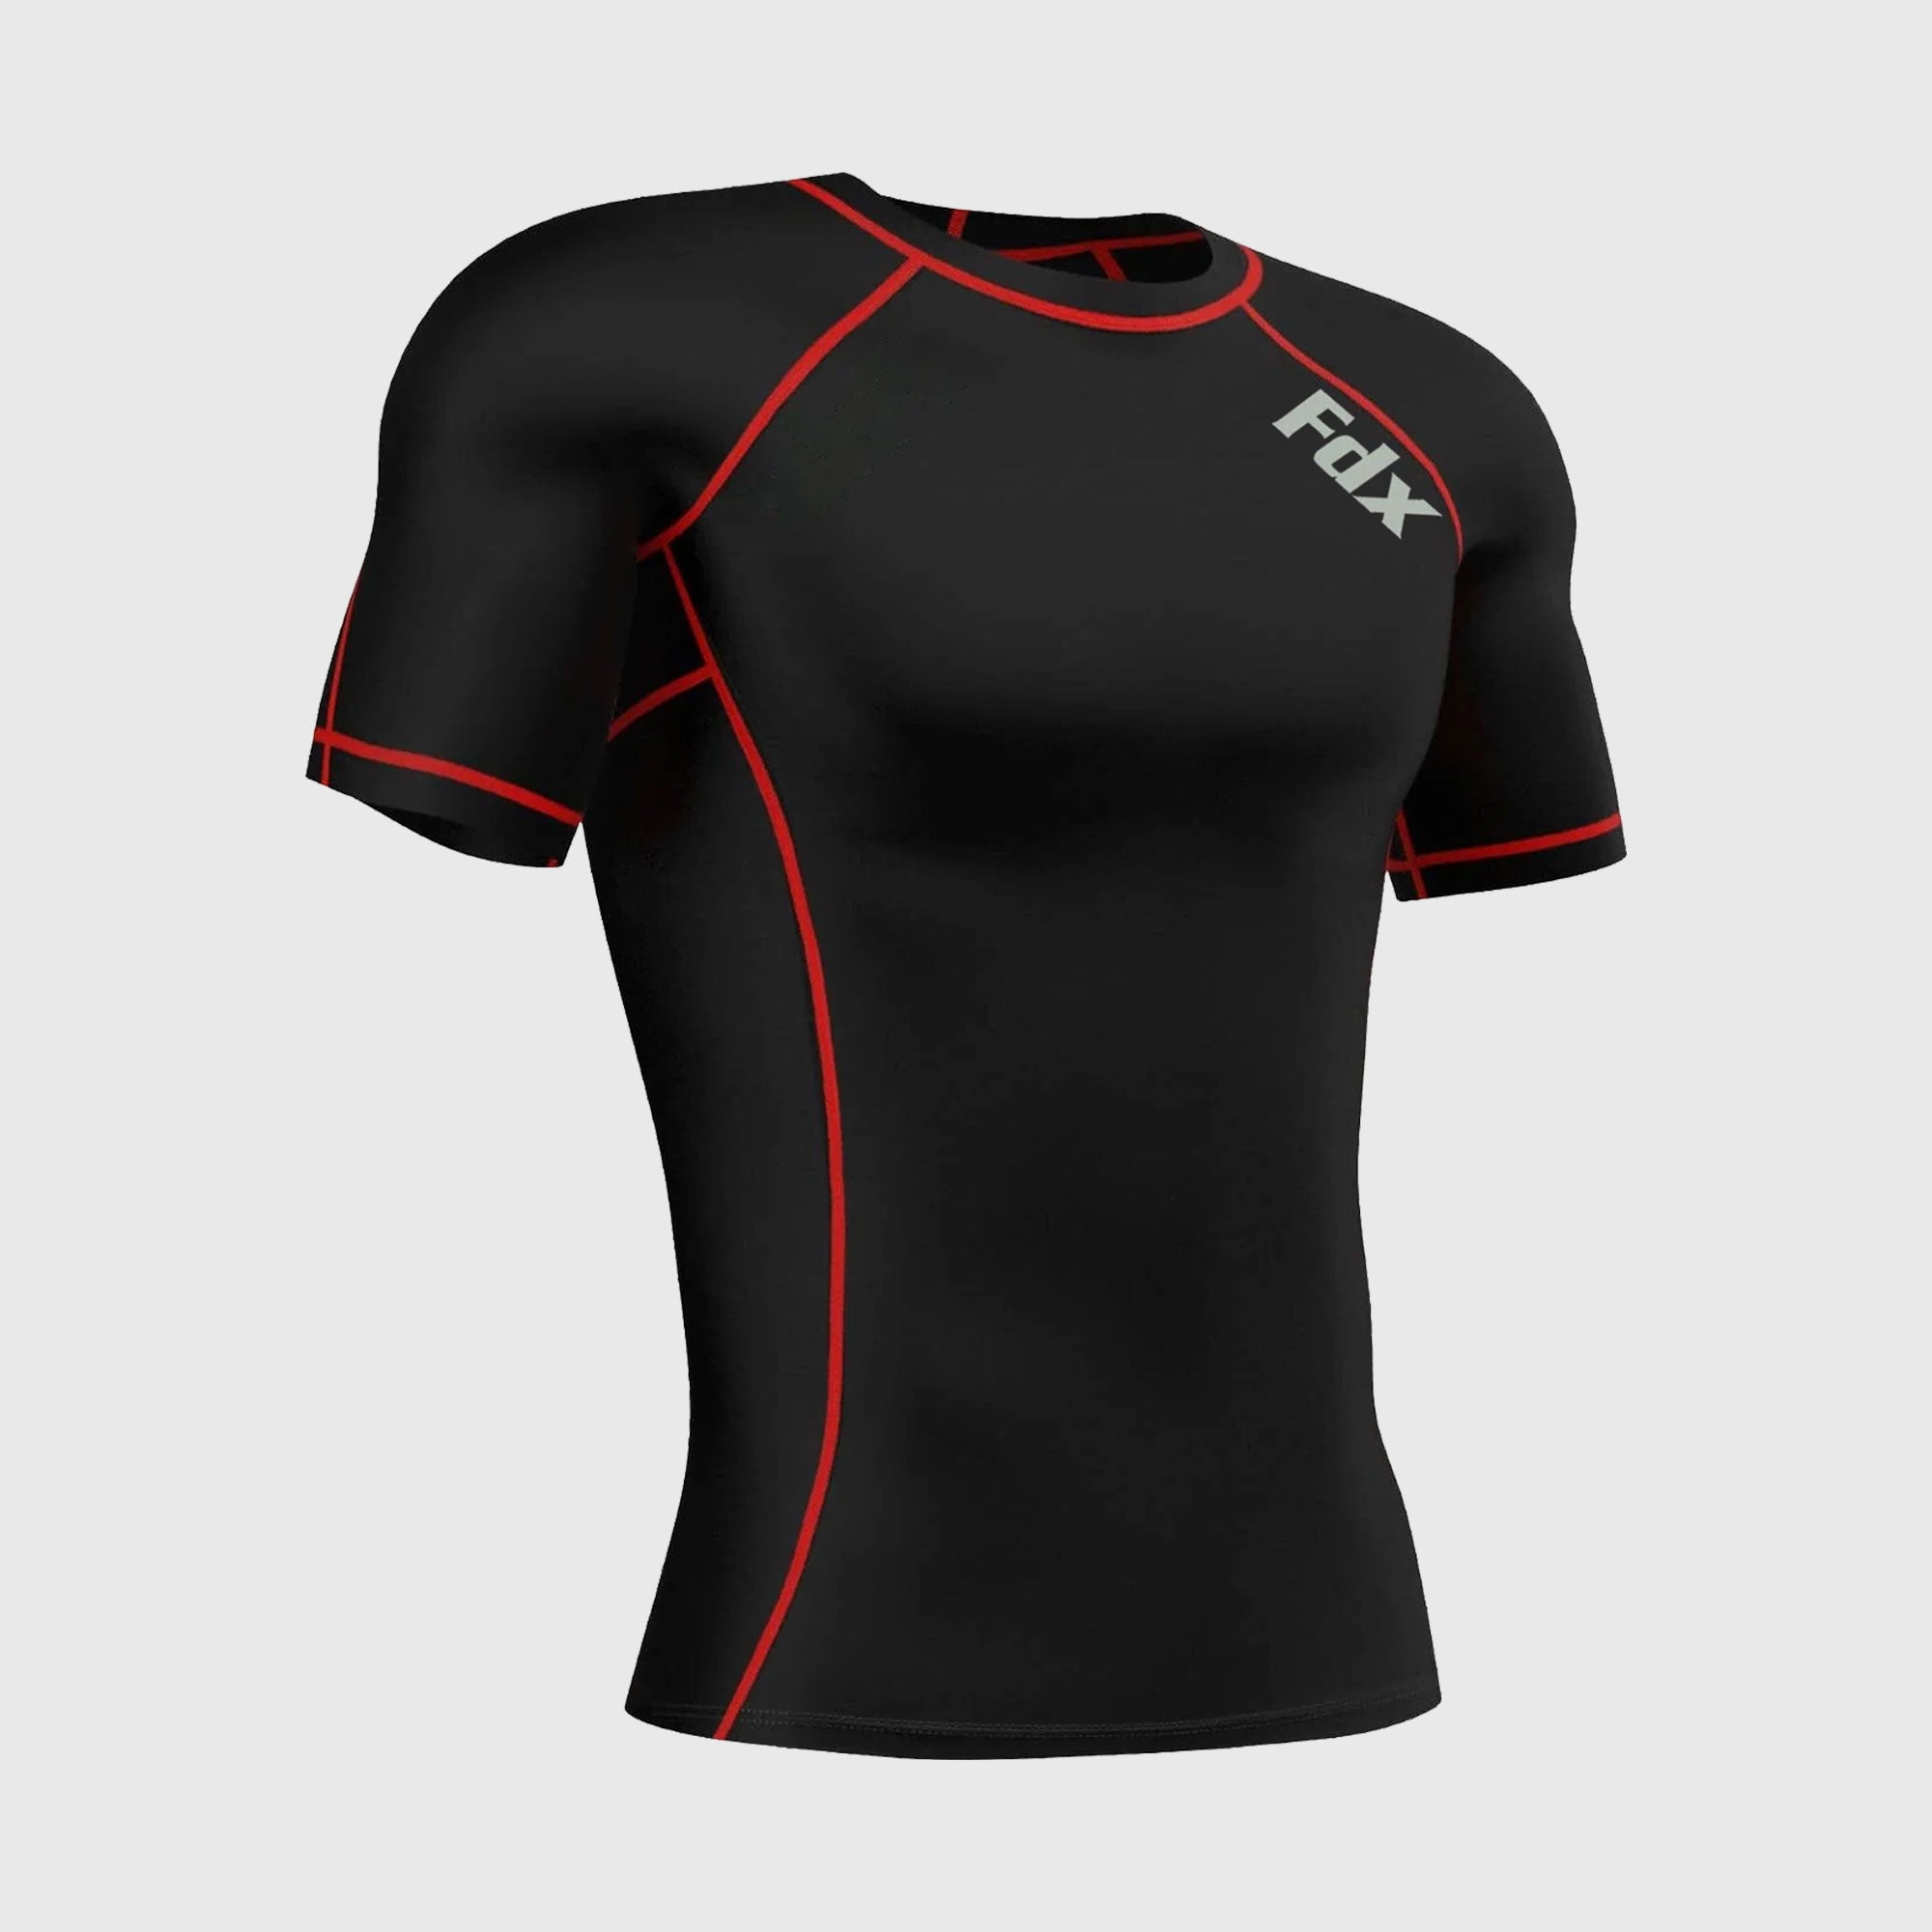 Fdx Men's Black & Red Short Sleeve Compression Top Running Gym Workout Wear Rash Guard Stretchable Breathable Base layer Shirt - Cosmic